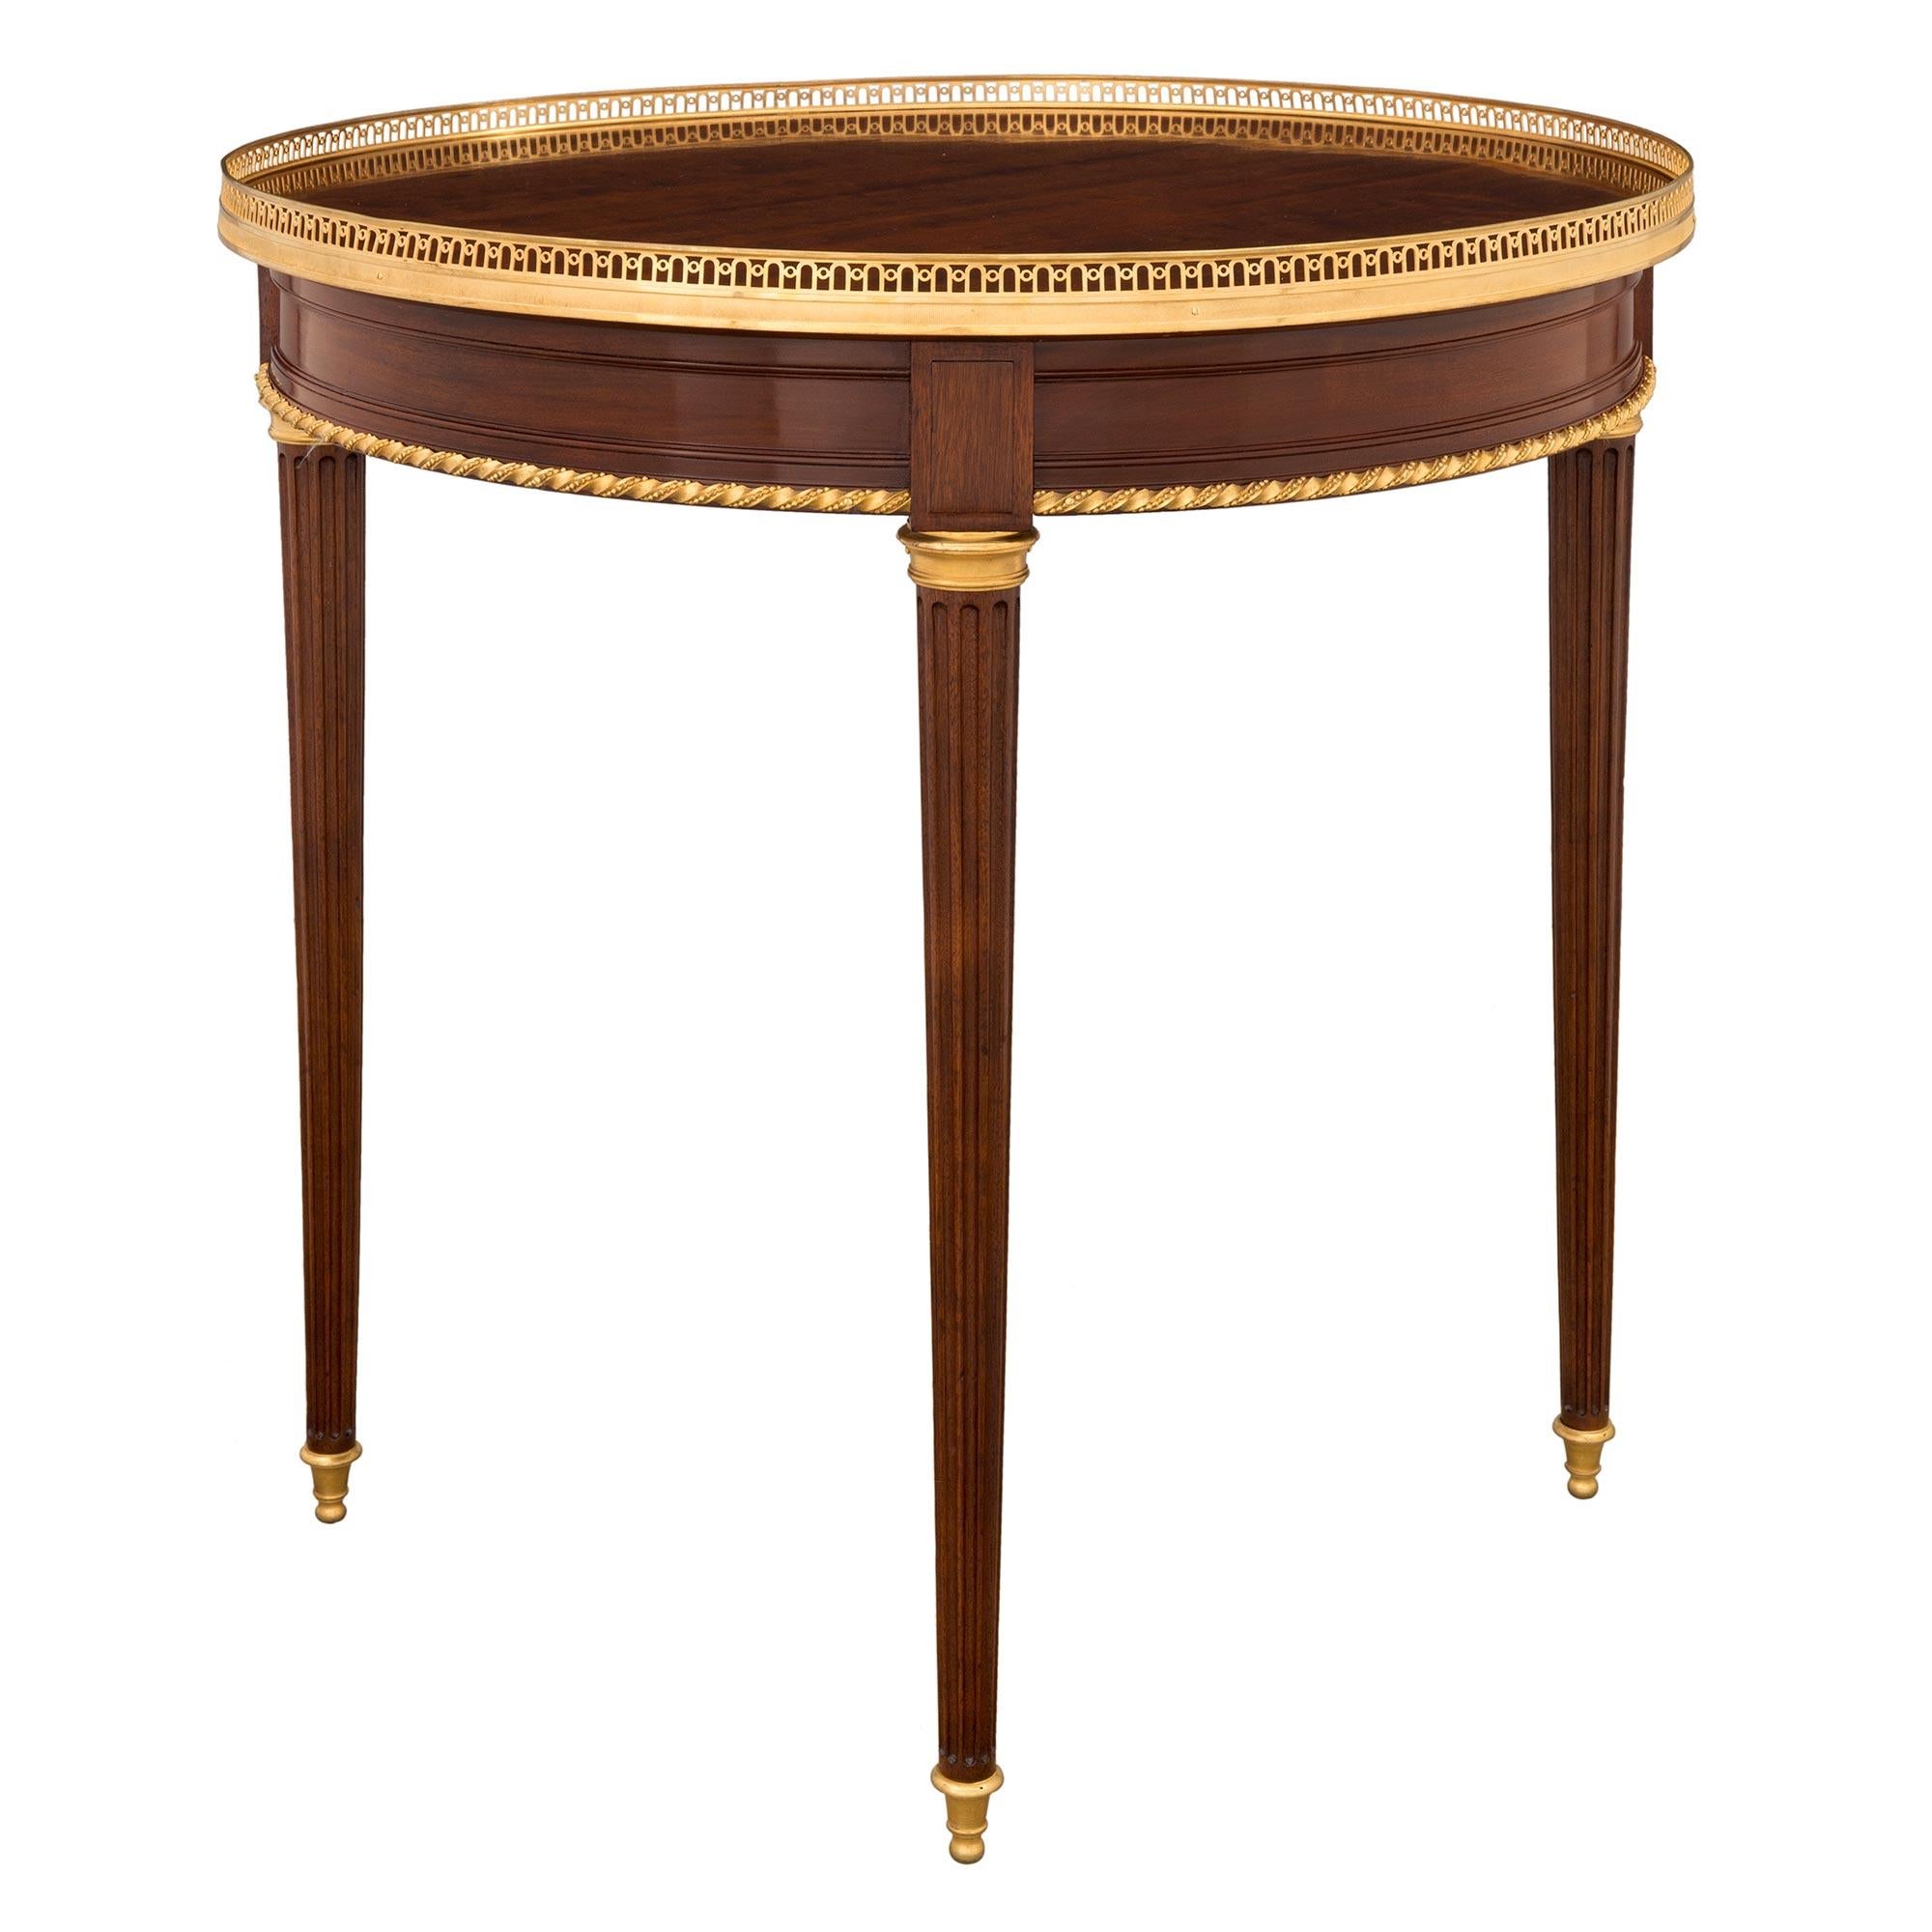 Belle Époque French 19th Century Louis XVI Style Mahogany and Ormolu Circular Side Table For Sale